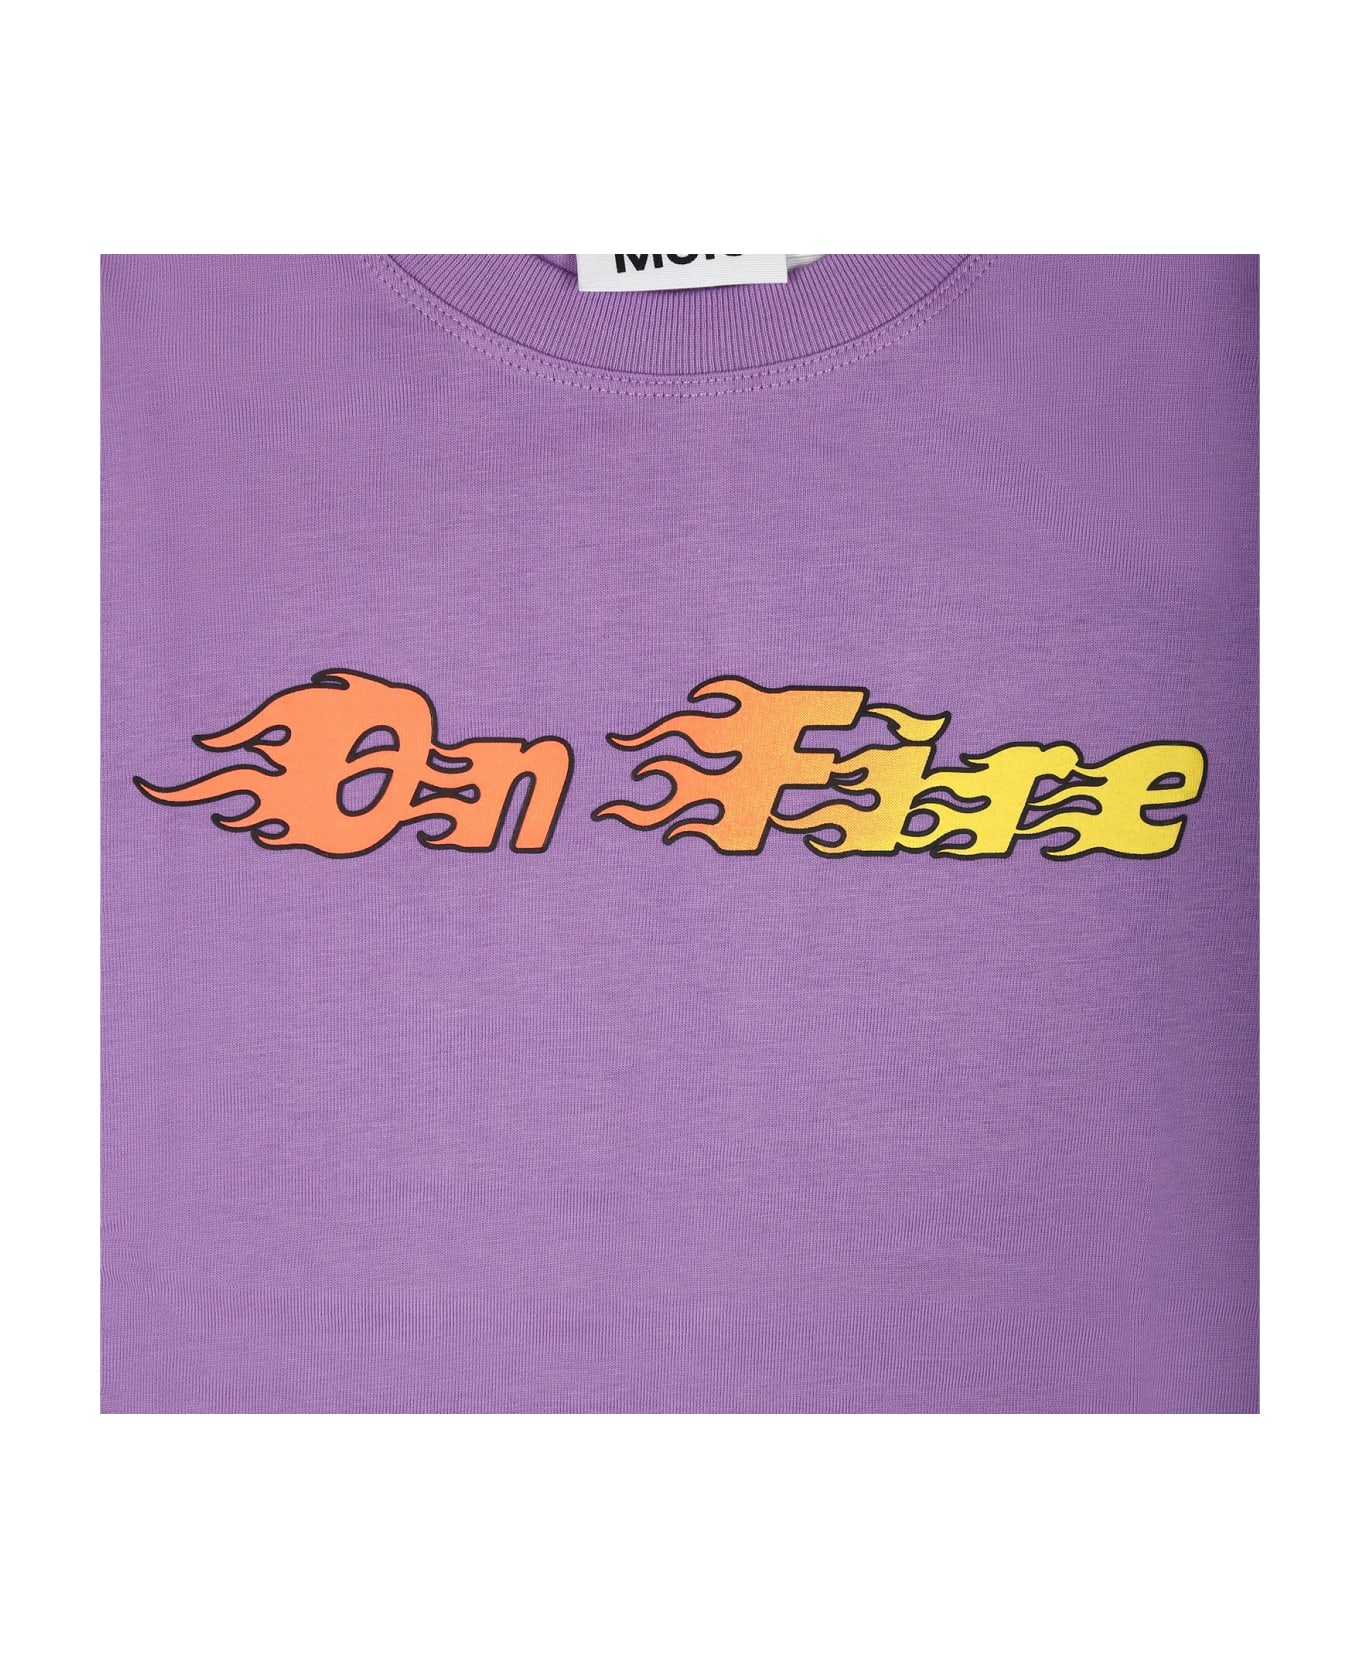 Molo Purple T-shirt For Boy With Writing - Violet Tシャツ＆ポロシャツ